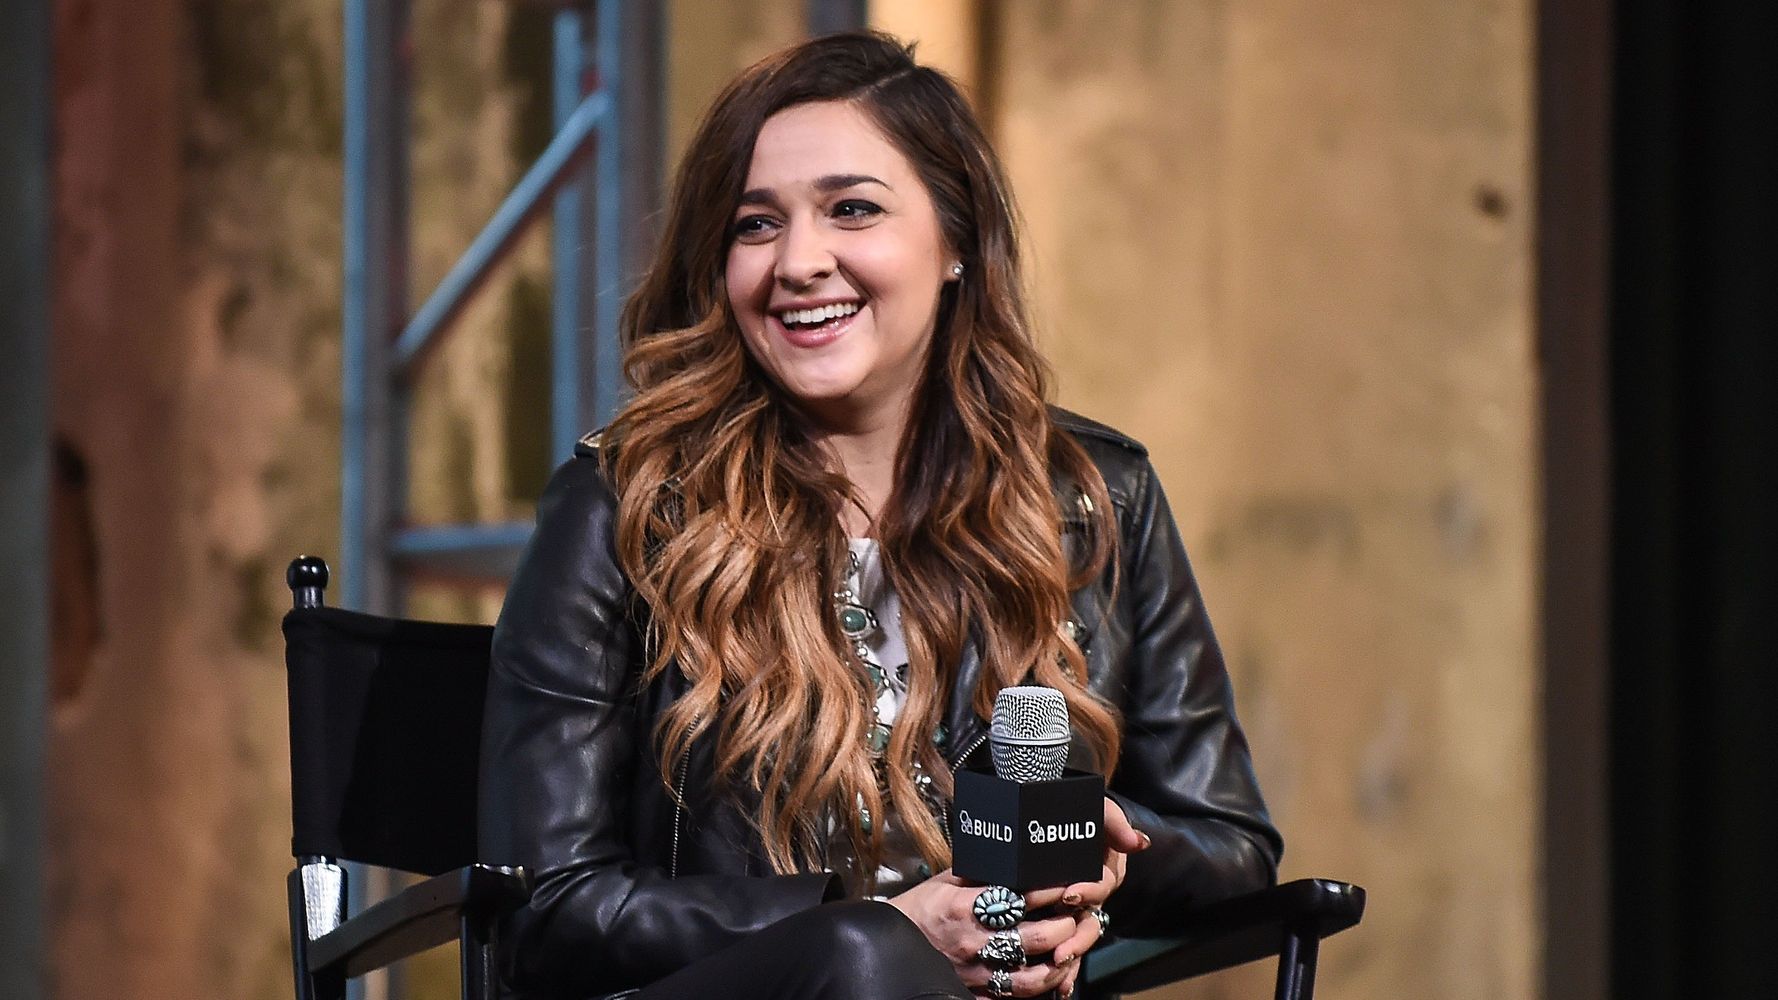 'The Voice' Winner Alisan Porter On Finding Success Again After Child